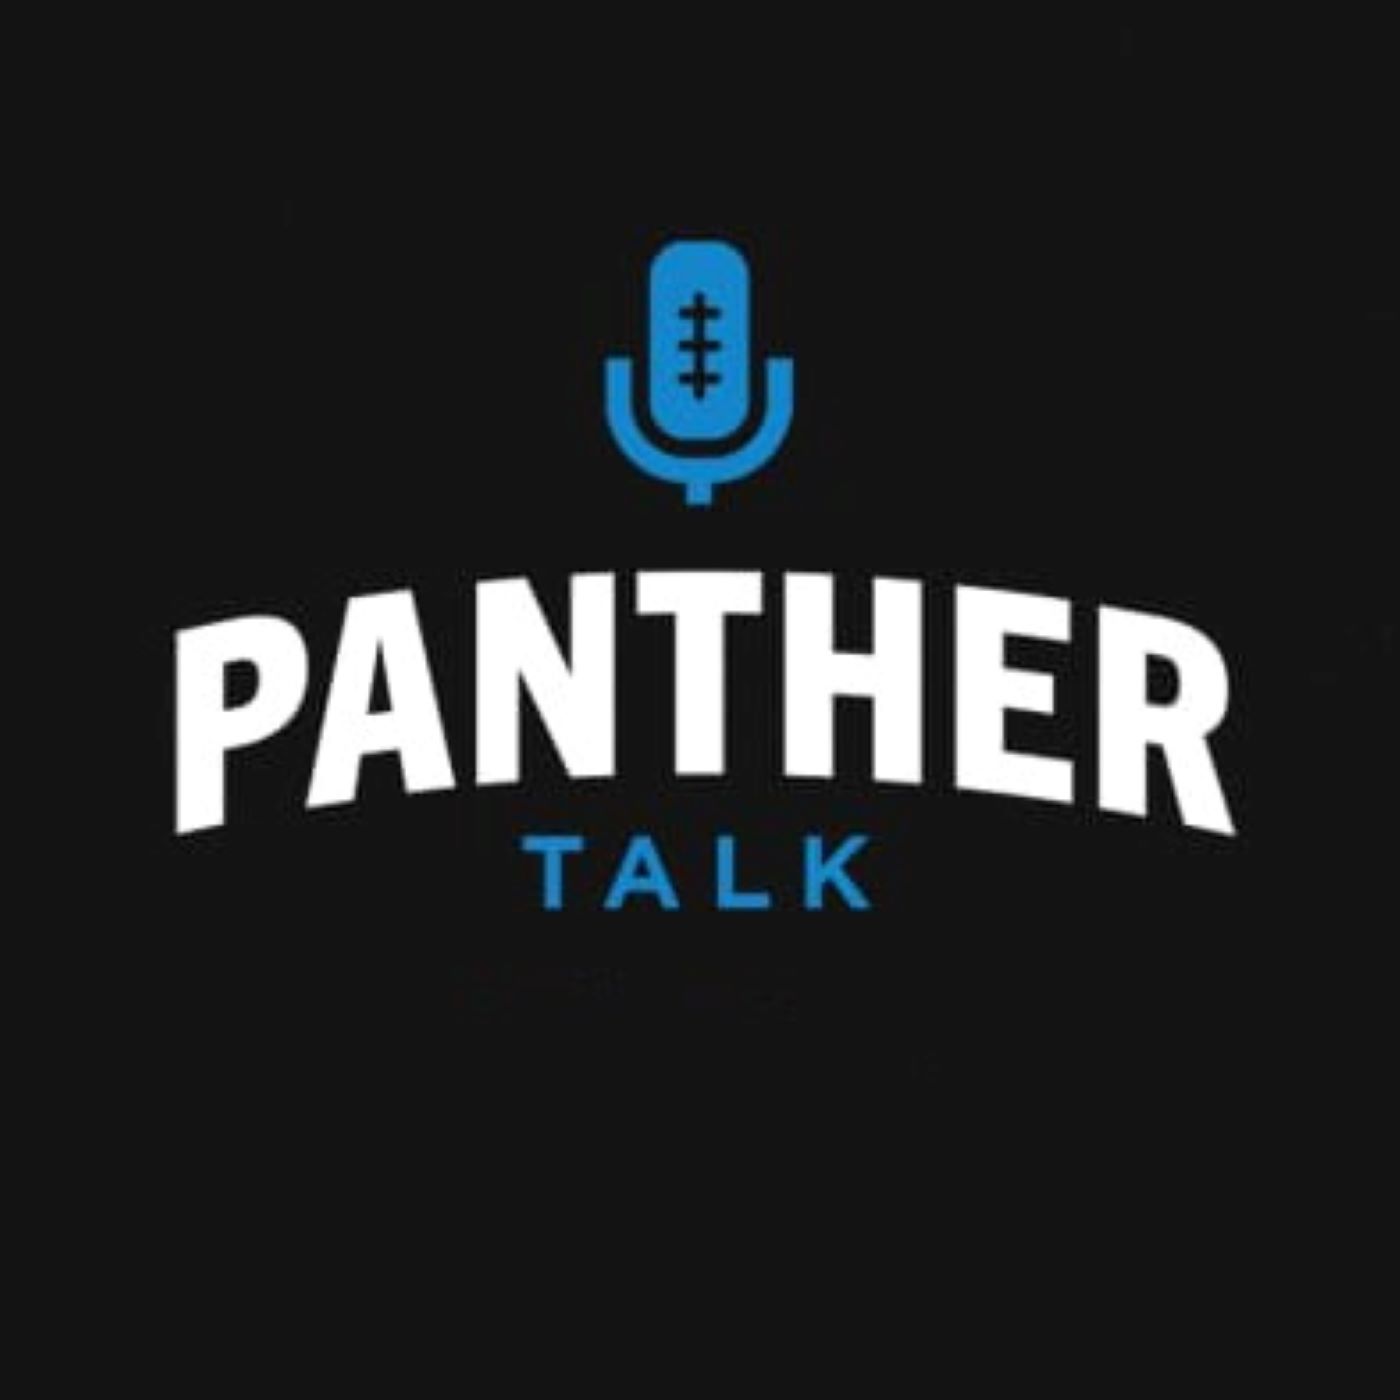 Panther Talk (August 28th)